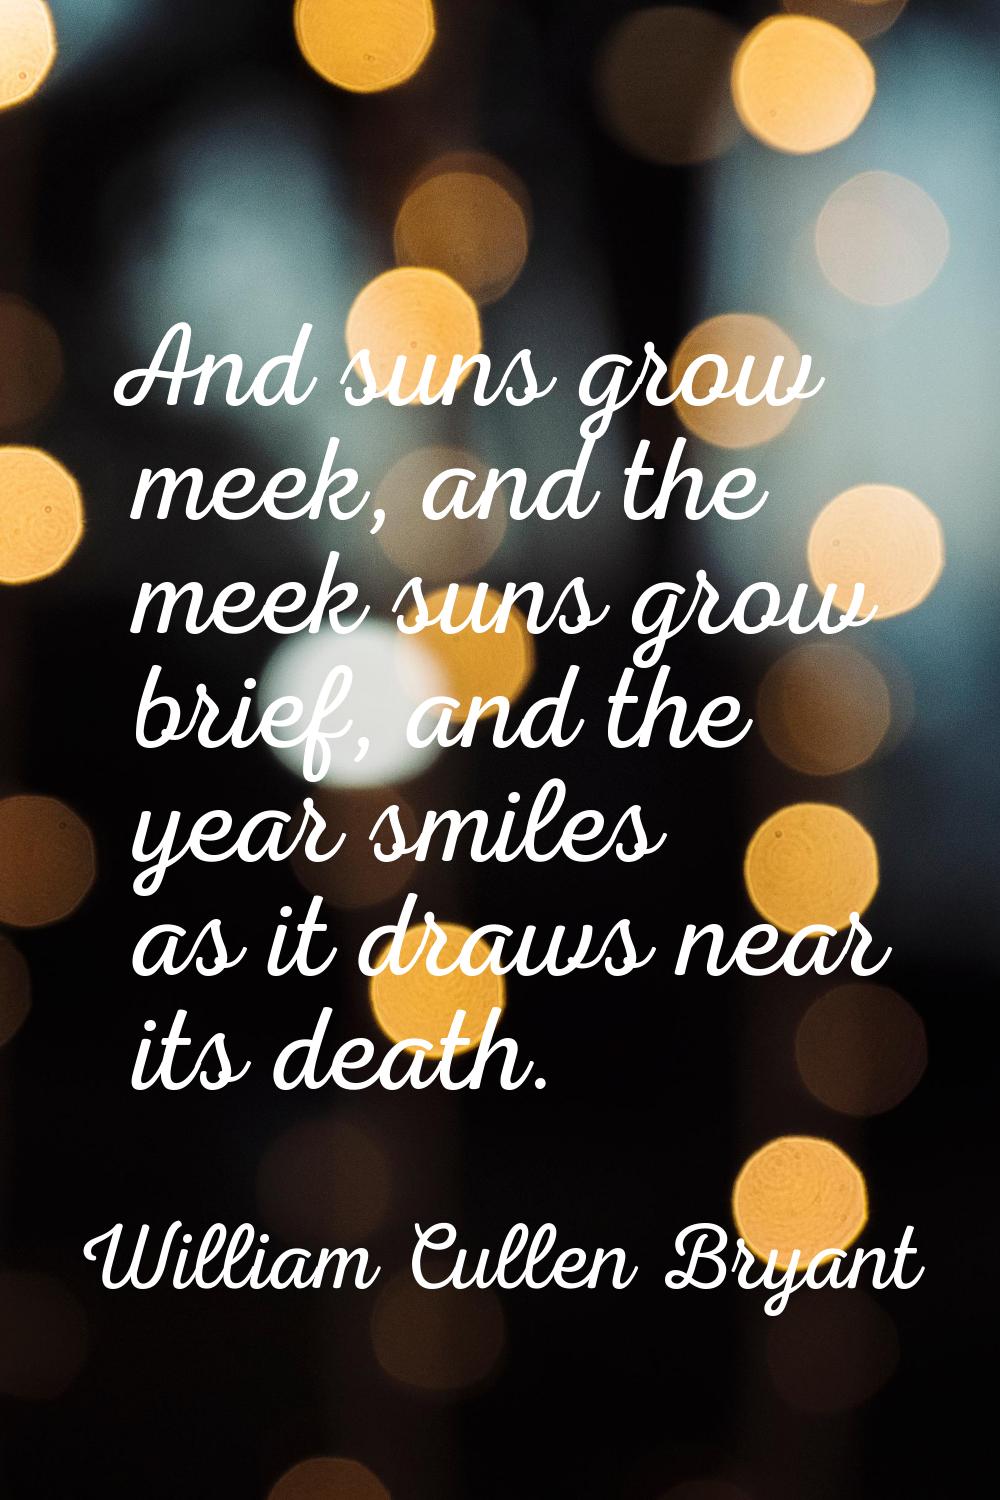 And suns grow meek, and the meek suns grow brief, and the year smiles as it draws near its death.